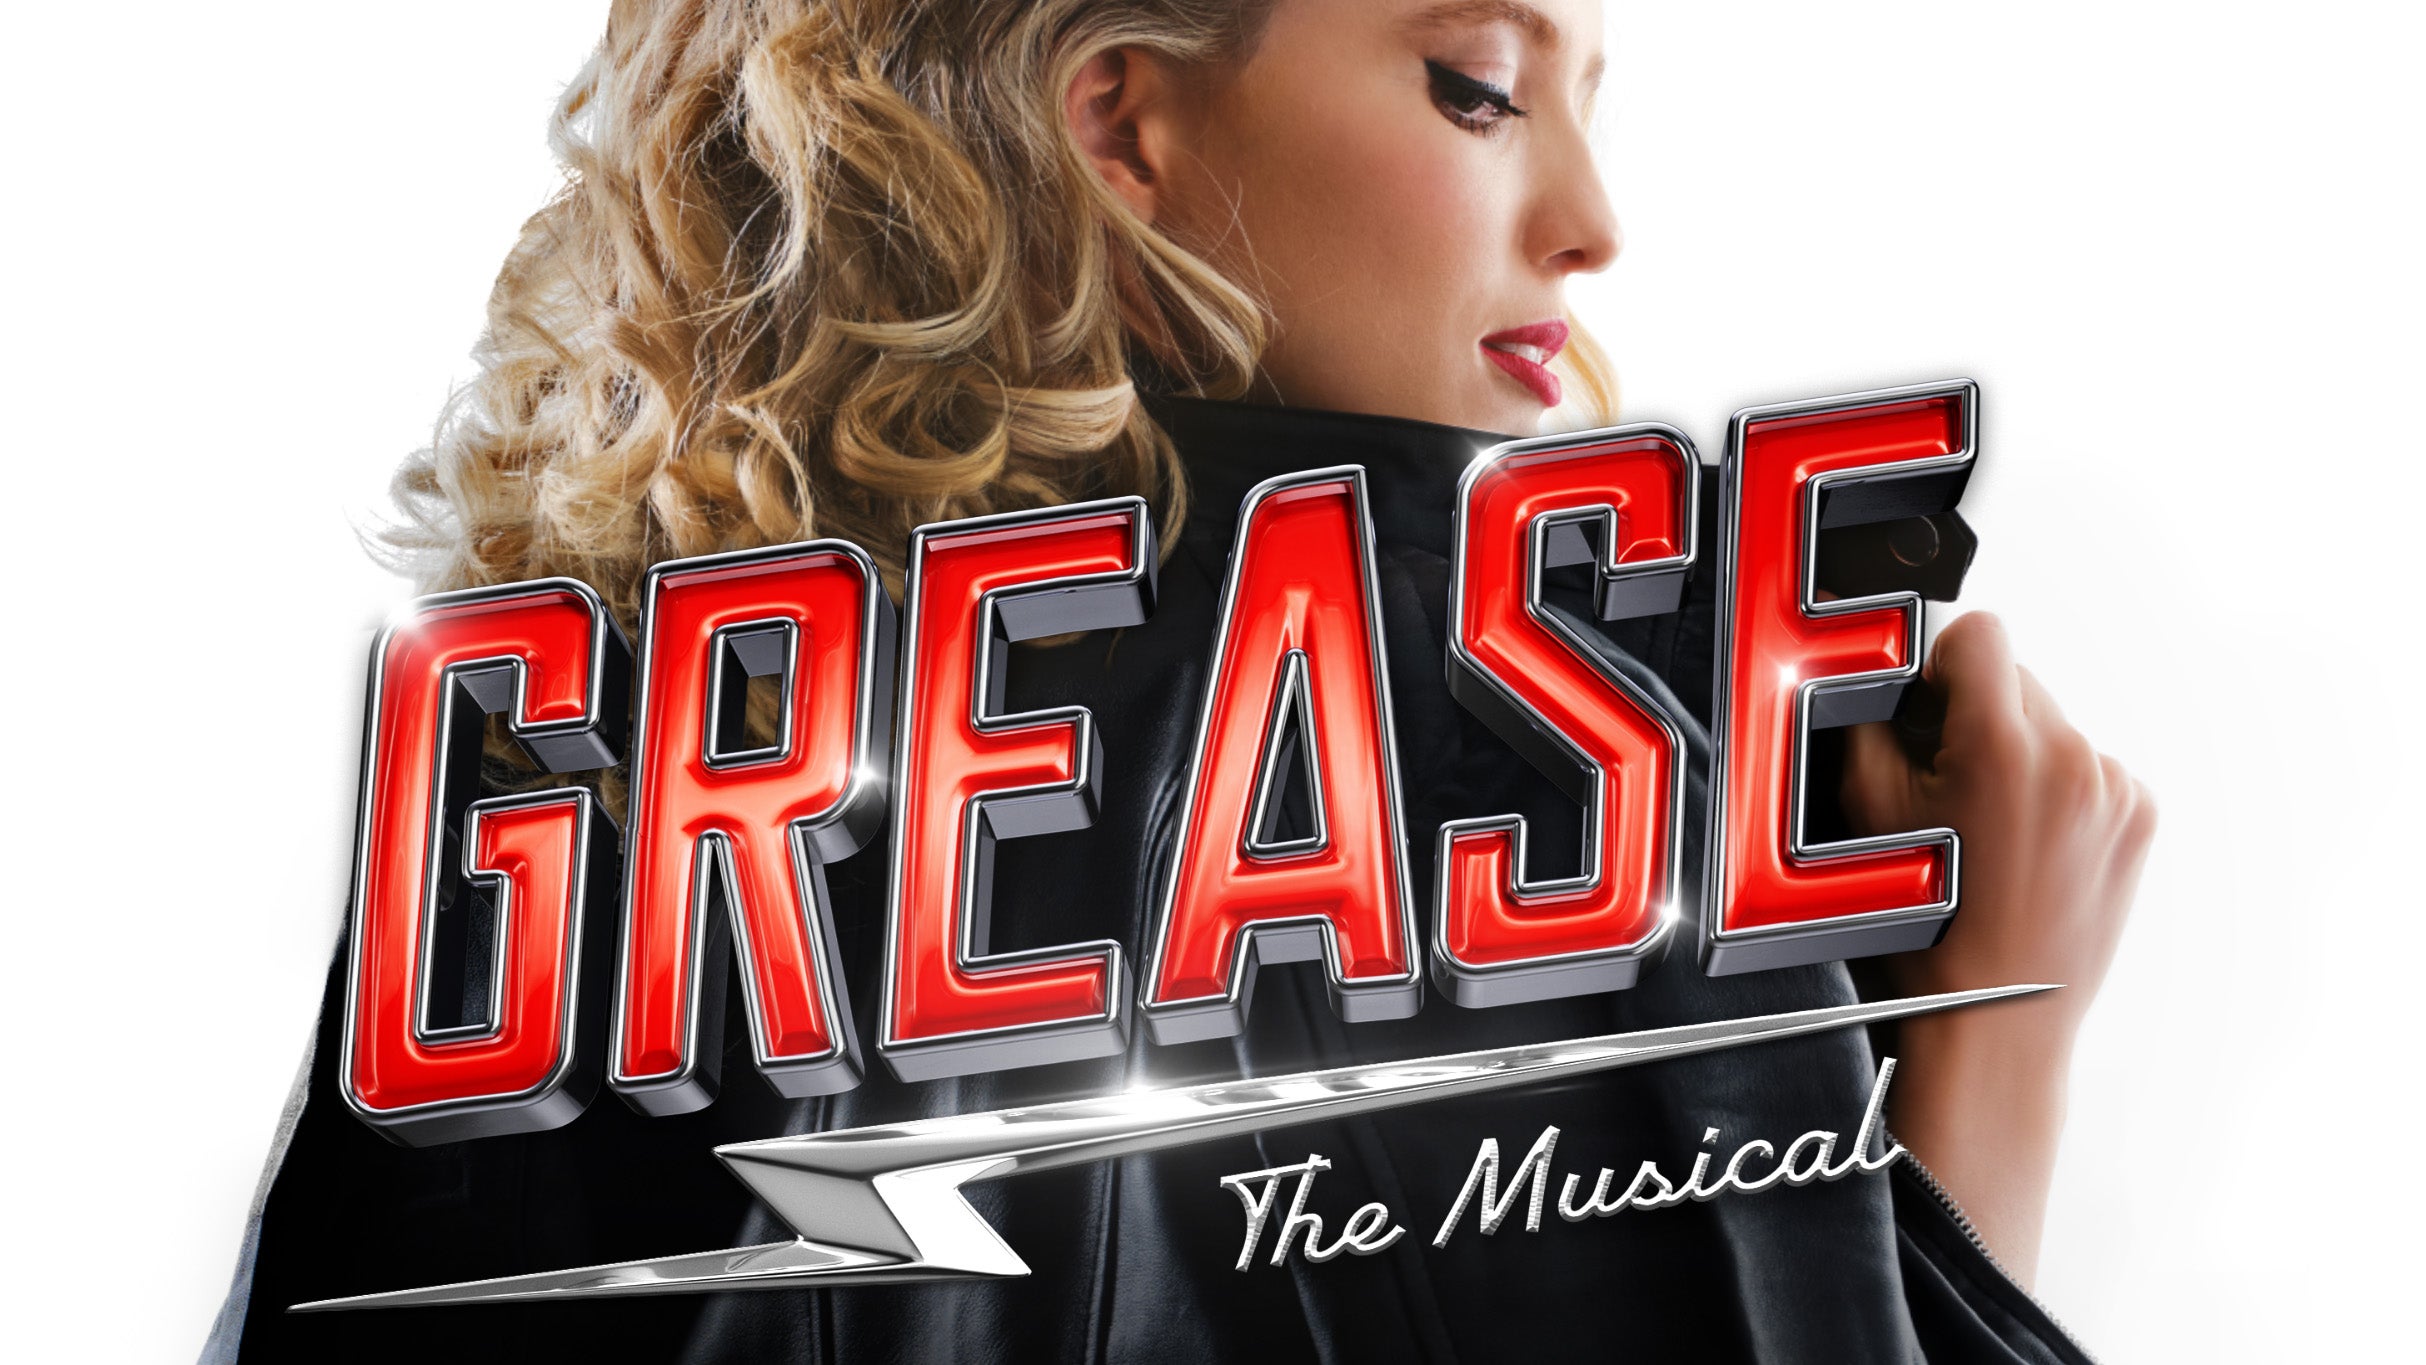 Grease in Burswood promo photo for Exclusive presale offer code